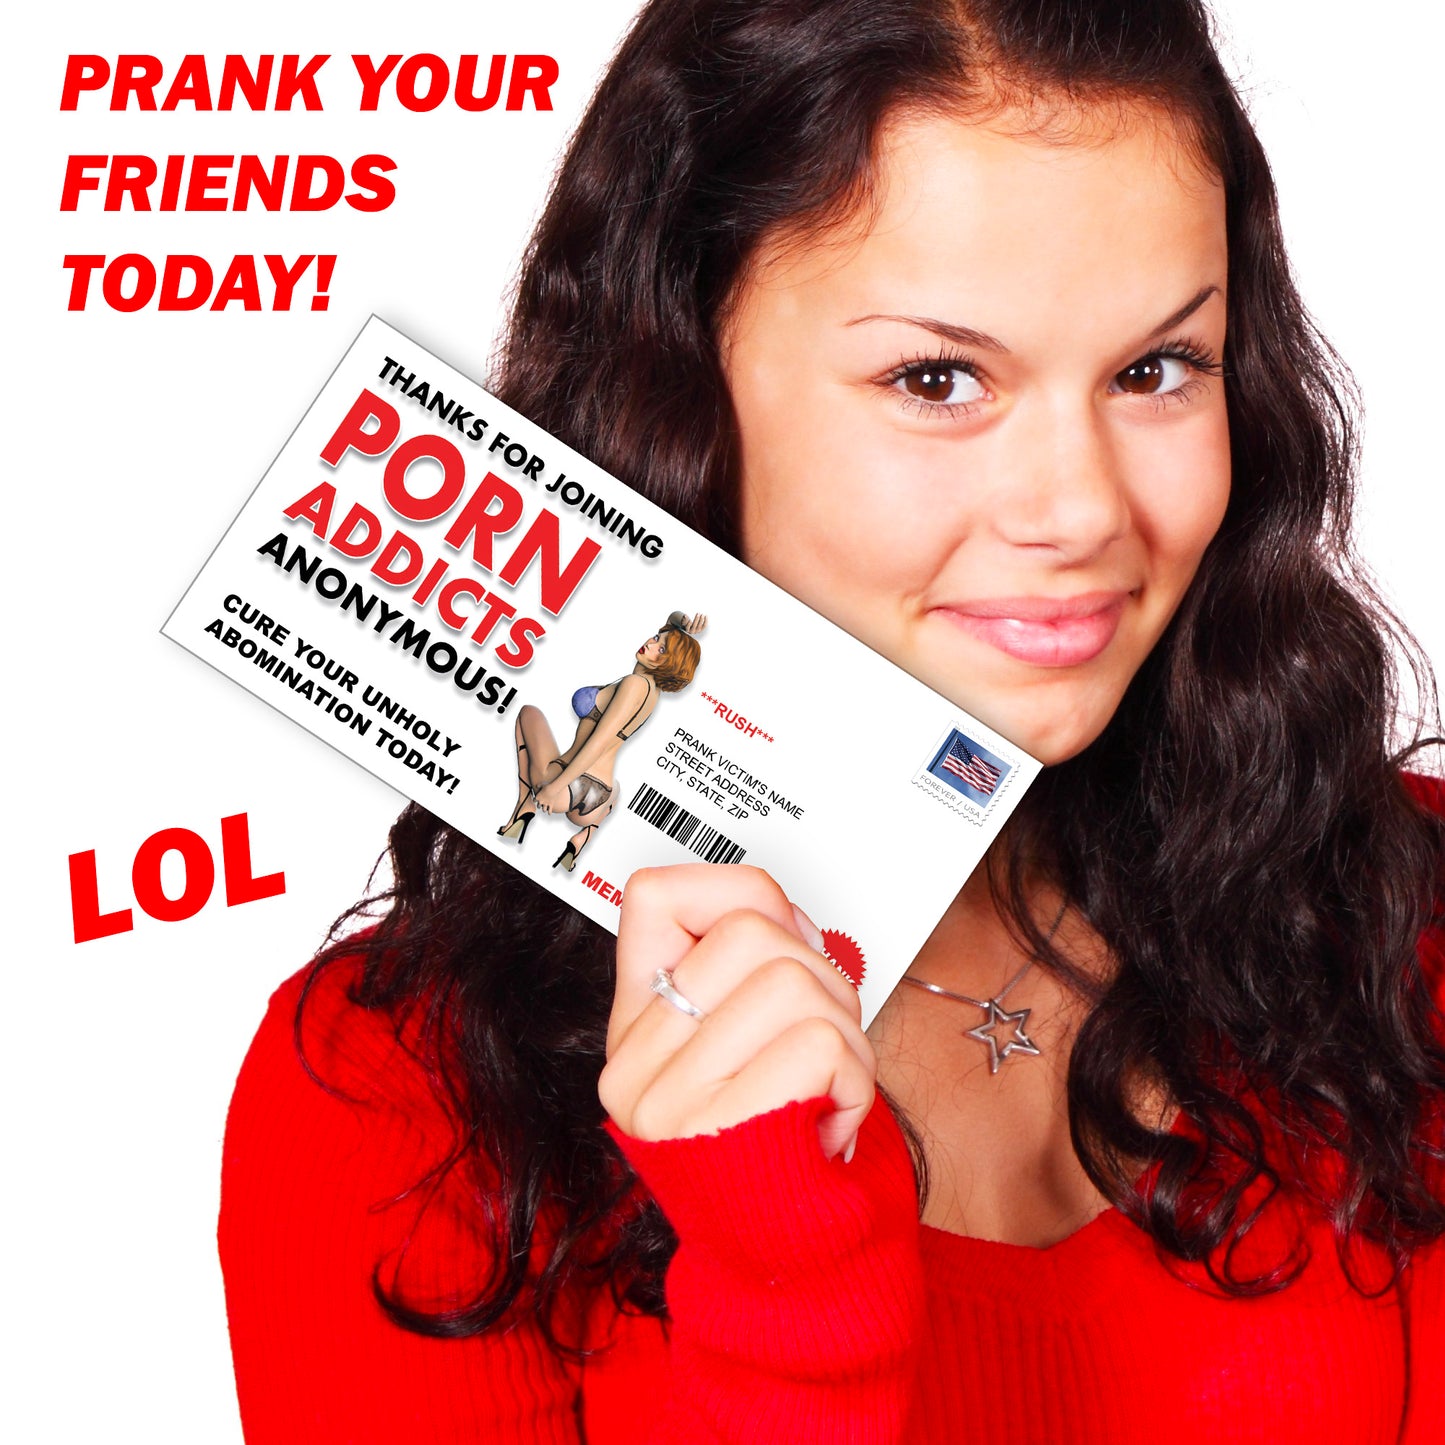 Porn Addicts Anonymous Mail Prank Letter